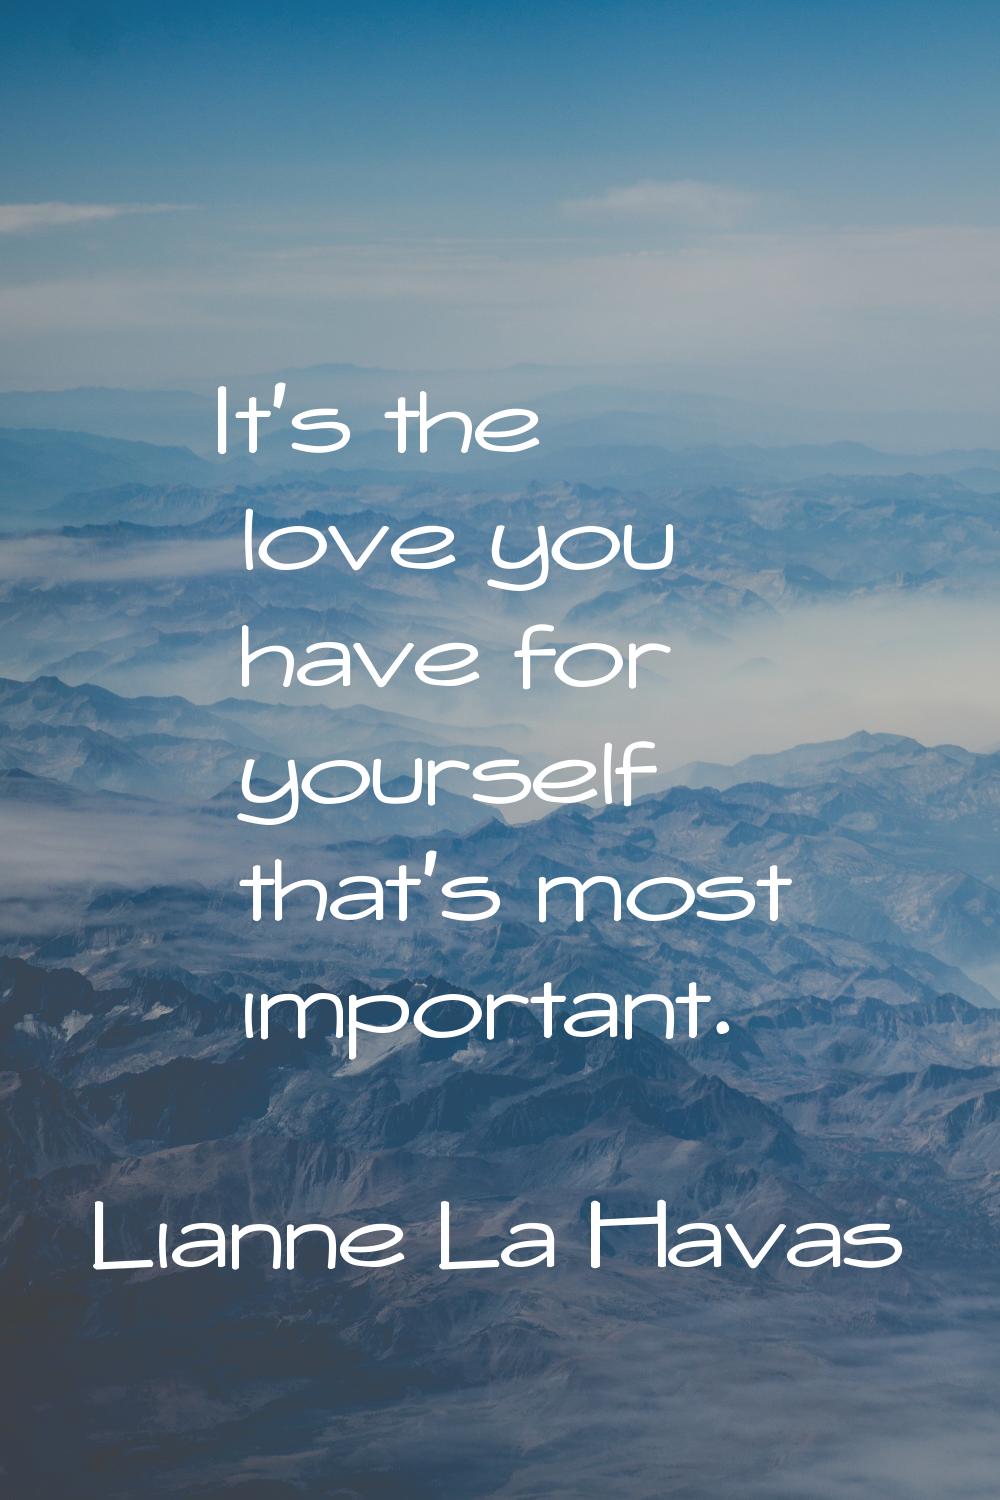 It's the love you have for yourself that's most important.